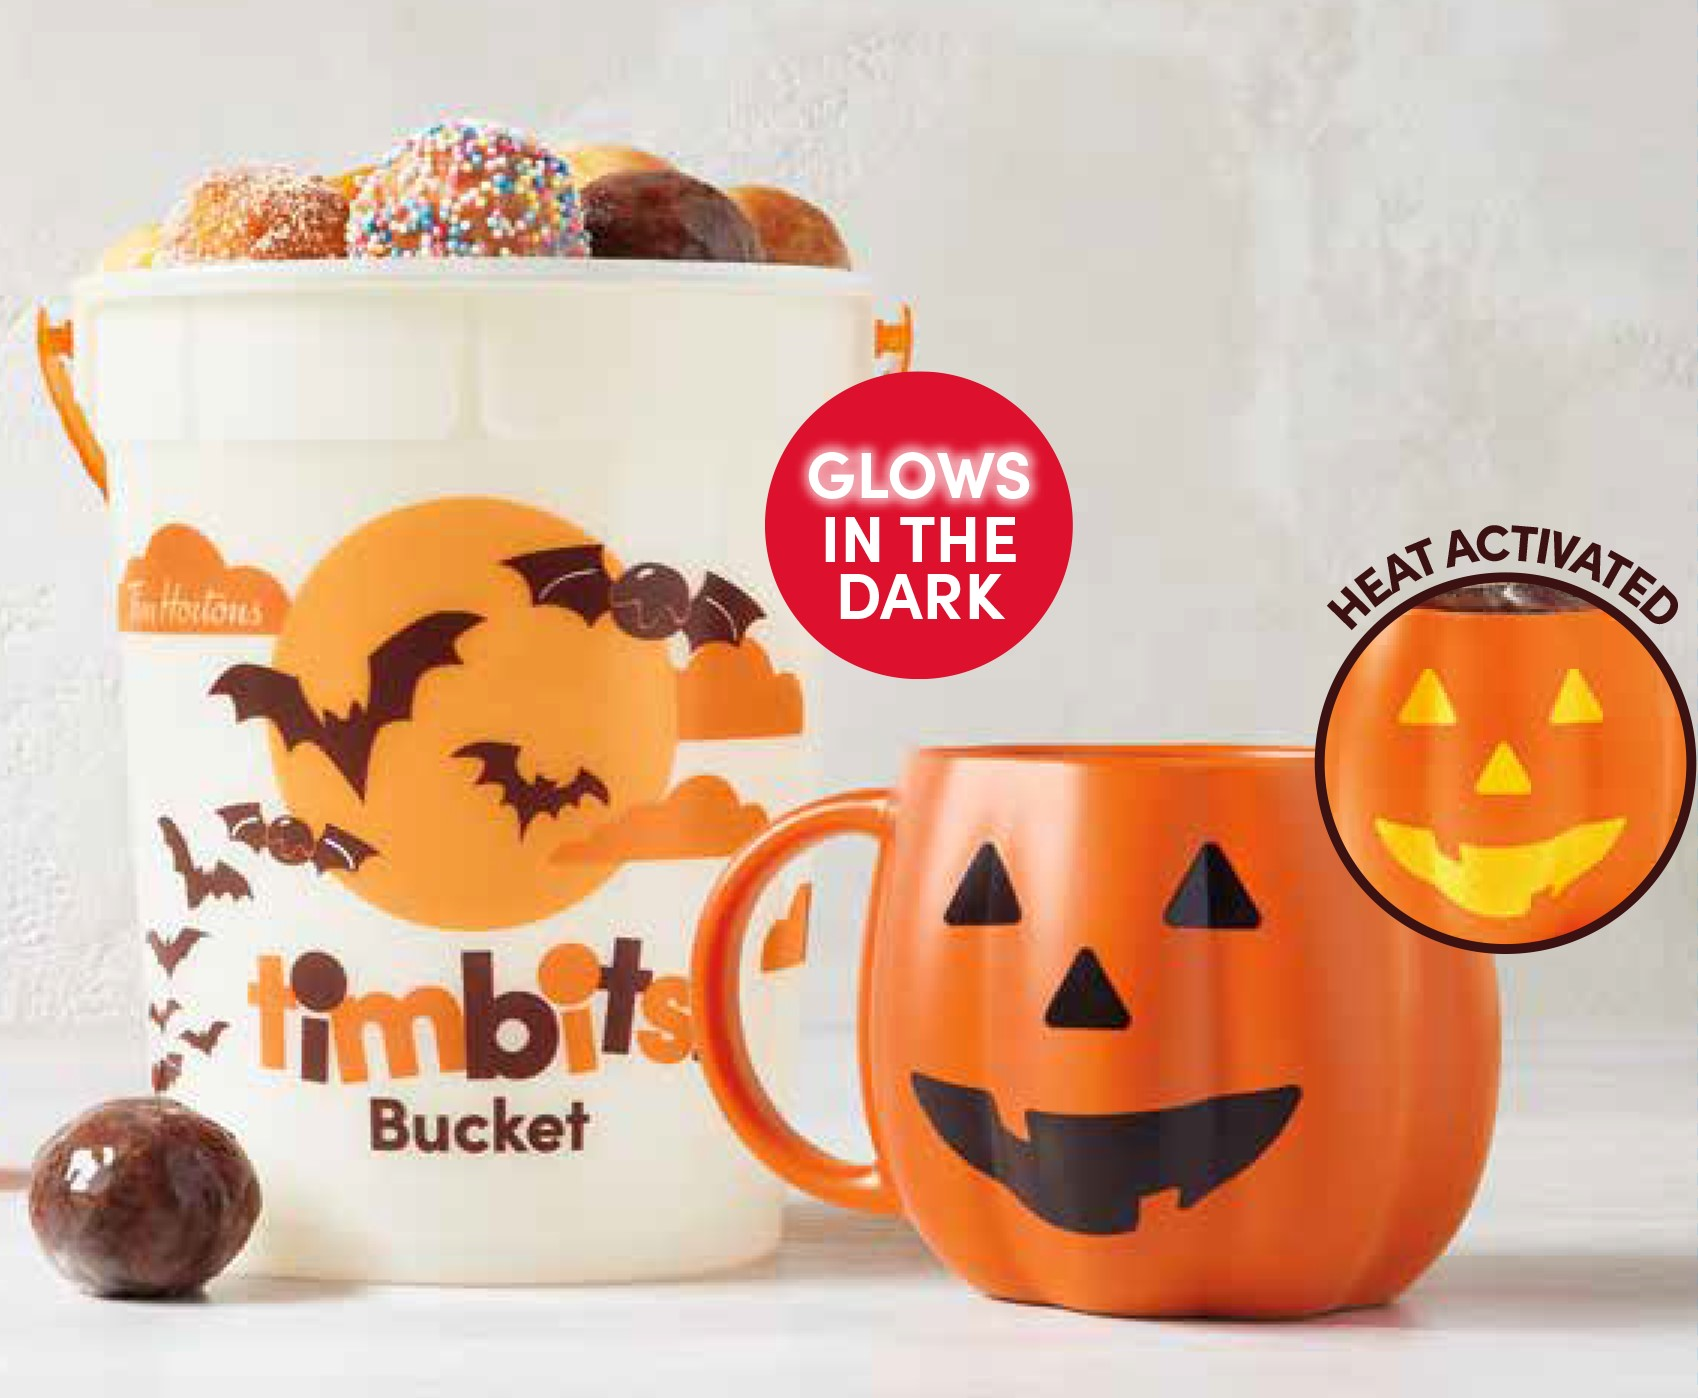 Tim Hortons has NEW limited-edition merch for Halloween - View the